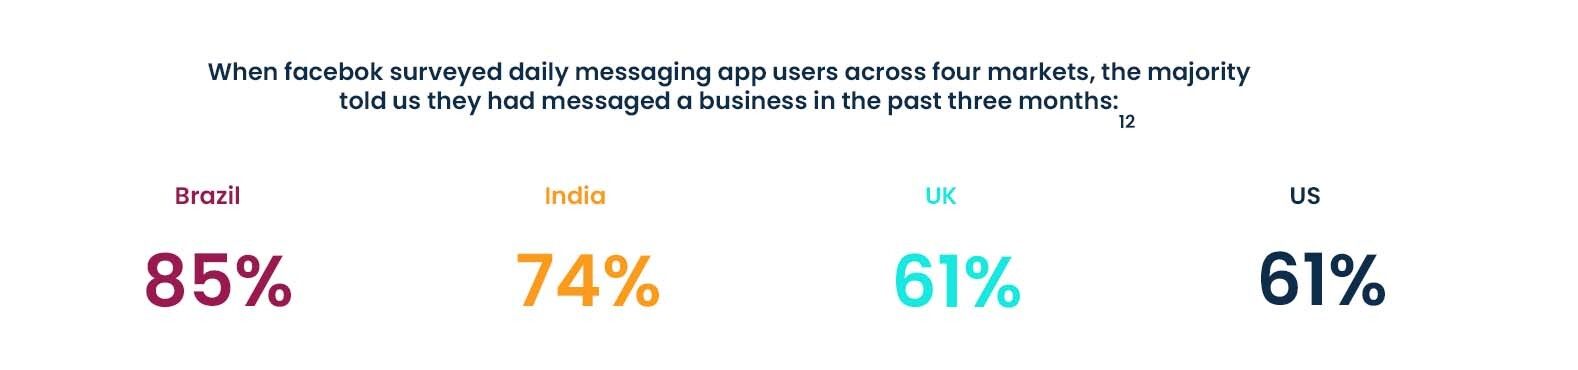 Statistics on users messaging a business in the past three months